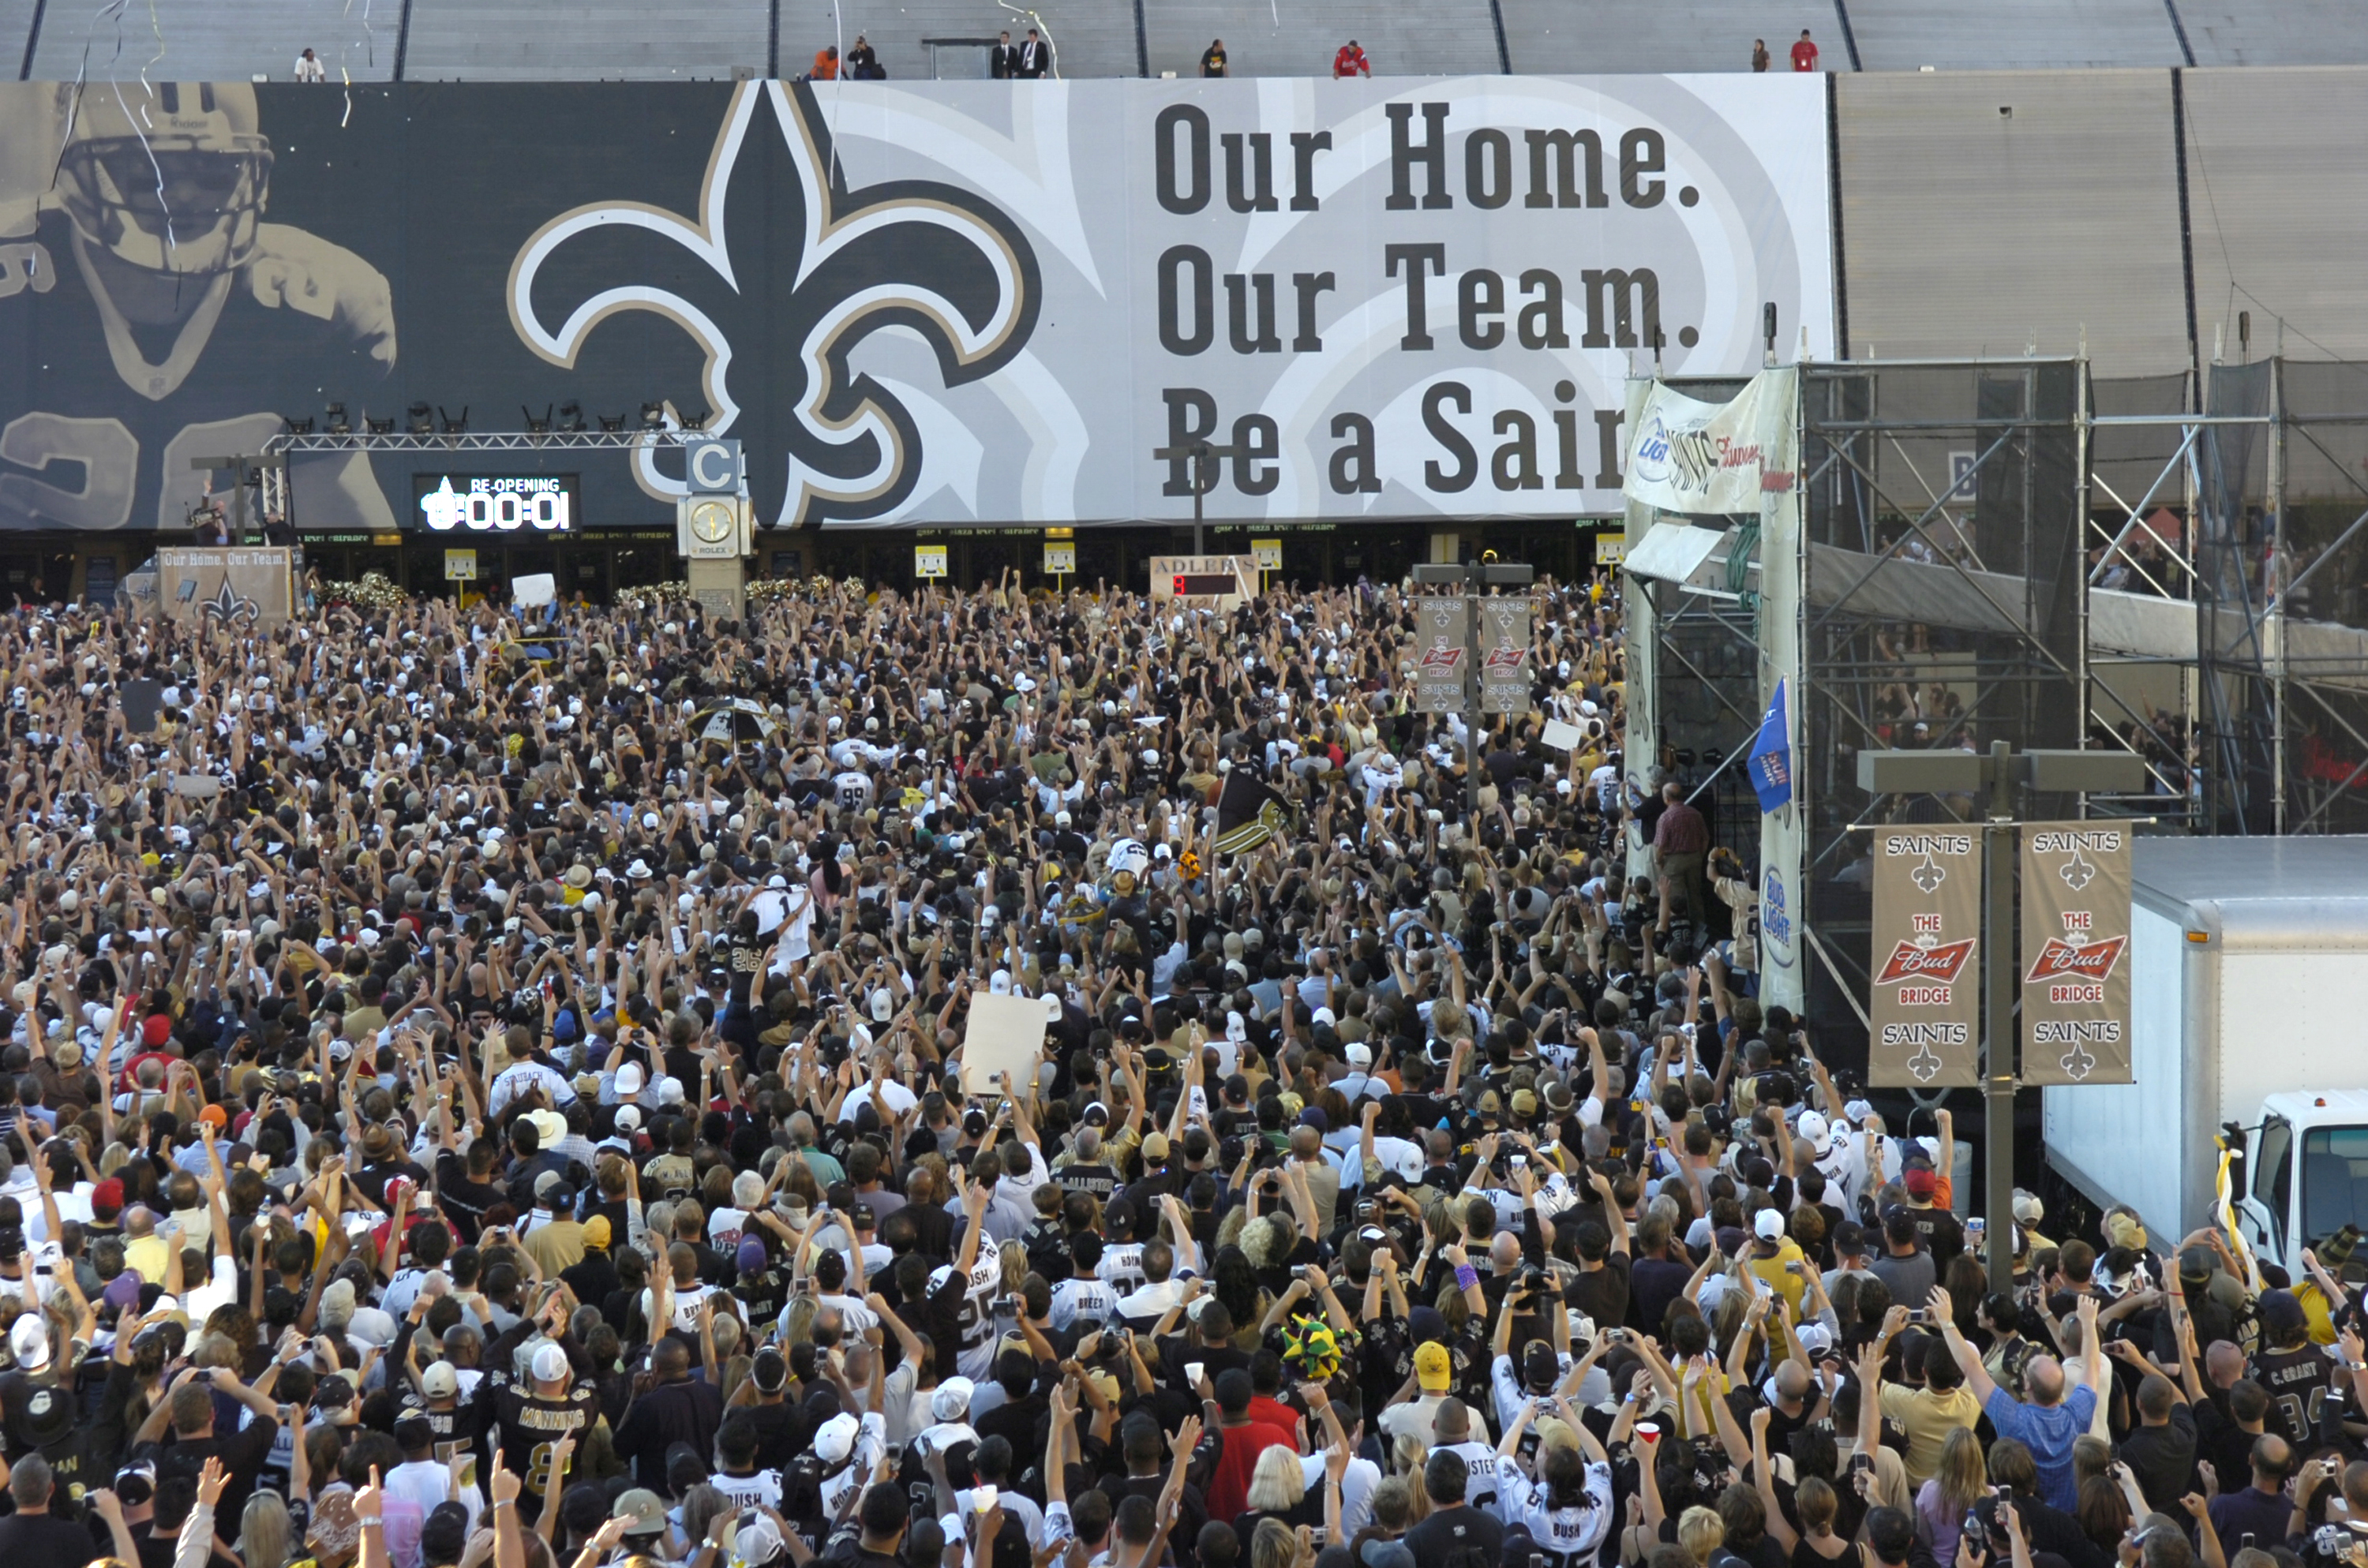 The banner drops outside the Louisana Superdome before the ESPN Monday Night Football  game September 25, 2006 in New Orleans.  (Photo by Al Messerschmidt/Getty Images)